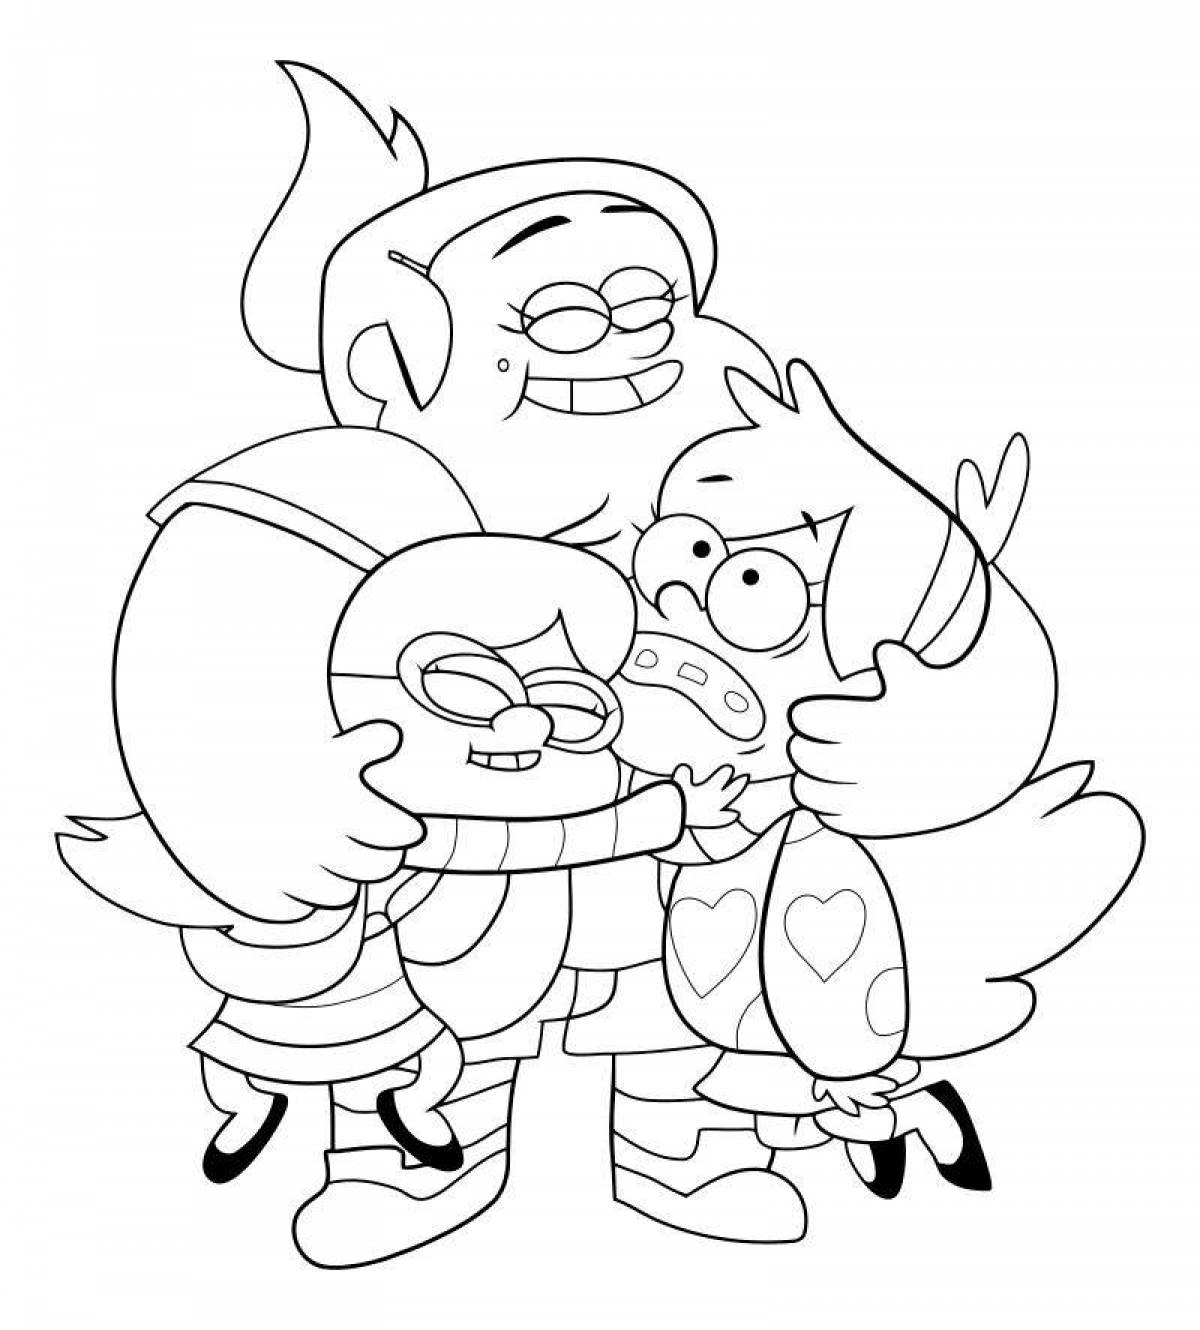 Gravity falls funny characters